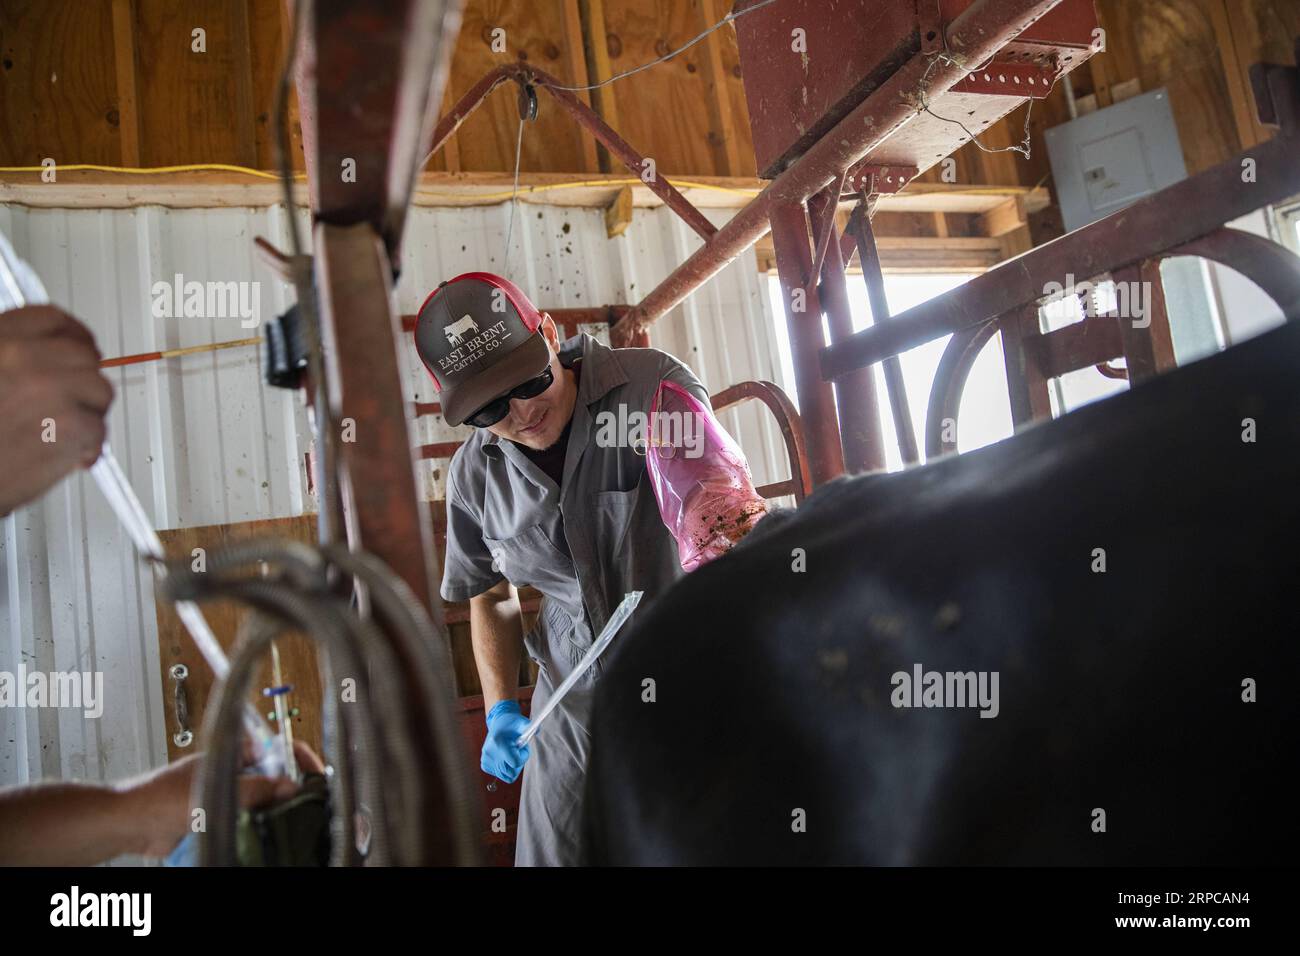 (190629) -- ATLANTIC (U.S.), June 29, 2019 -- Cody Ham, Bill Pellett s long-time business partner Phil Ham s son, carries out artificial insemination procedures on Bill Pellett s farm in Atlantic, Iowa, the United States, on June 20, 2019. Bill Pellett, a fifth-generation farmer in Atlantic, a small city in the U.S. Midwestern state of Iowa, has found a cost-effective way to raise better calves each year without purchasing new bulls -- artificial insemination (AI). ) TO GO WITH Feature: U.S. cattle farmer turns to artificial insemination for better quality beef U.S.-IOWA-ATLANTIC-CATTLE-ARTIFI Stock Photo